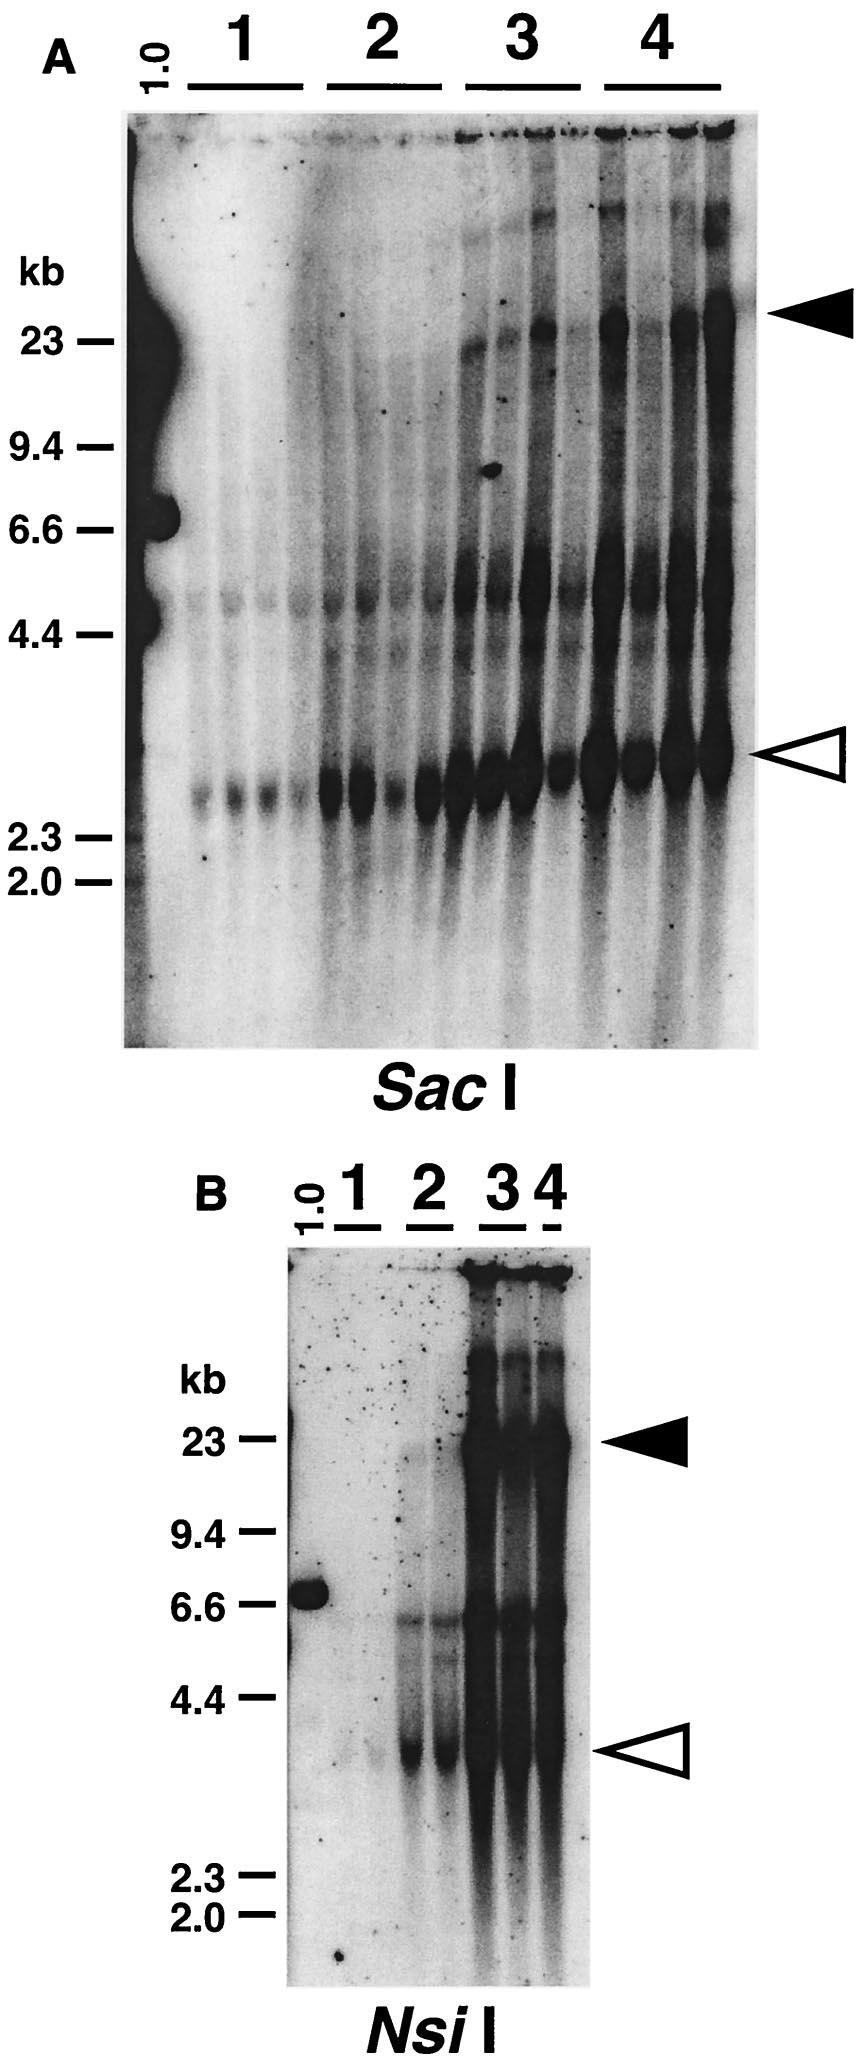 VOL. 76, 2002 VECTOR DOSE RESPONSE IN raav TRANSDUCTION IN LIVER 11347 FIG. 2. Southern blot analyses of raav vector genomes in the liver. Vector forms in AAV-hF.